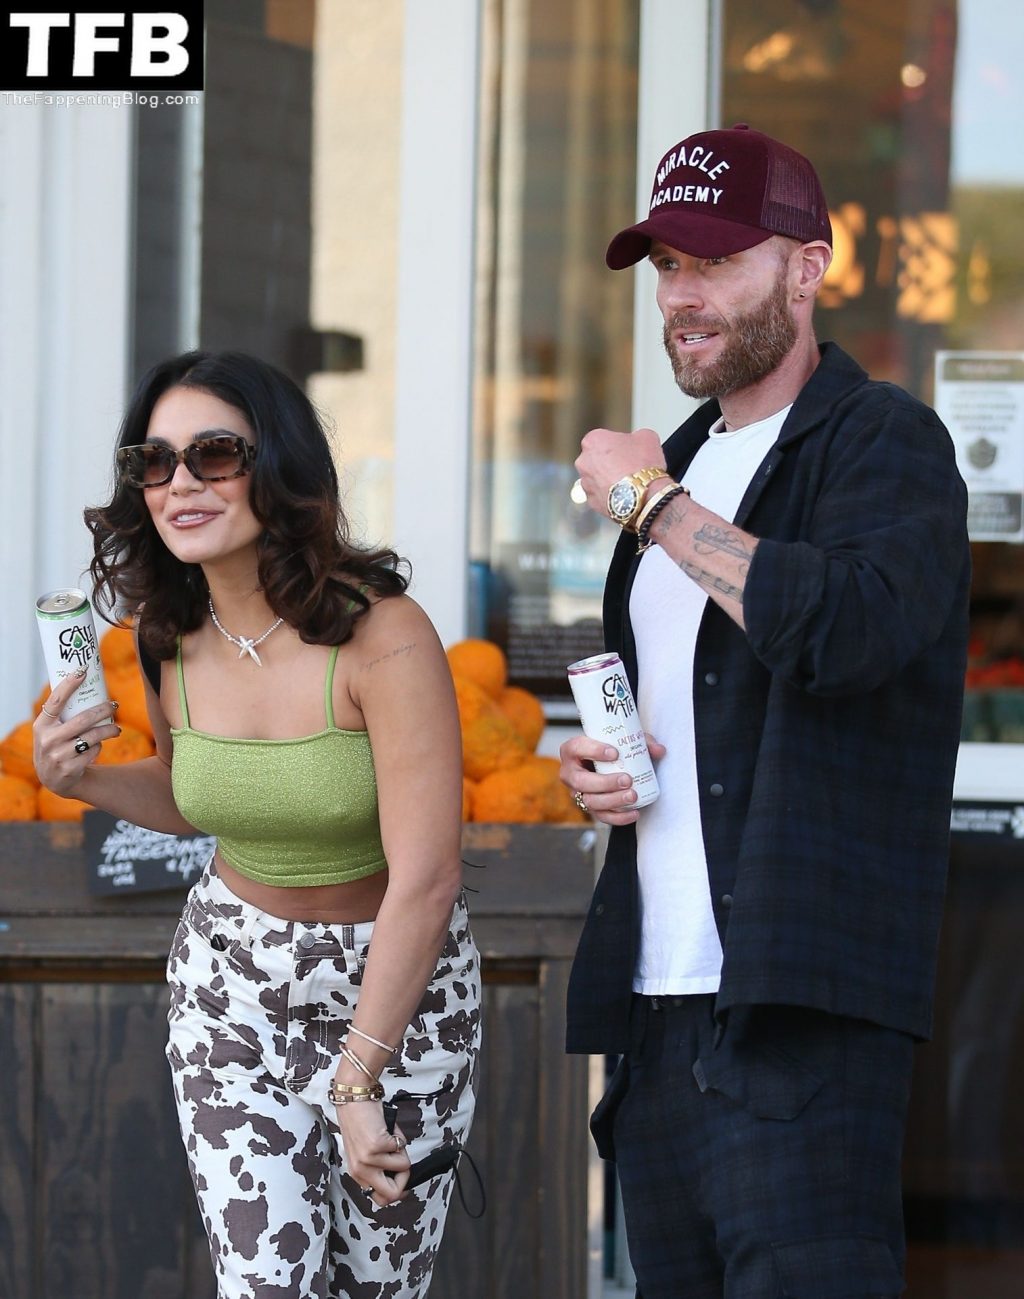 Braless Vanessa Hudgens Films a Promo Video For Her Beverage Company Cali Water in Beverly Hills (37 Photos)